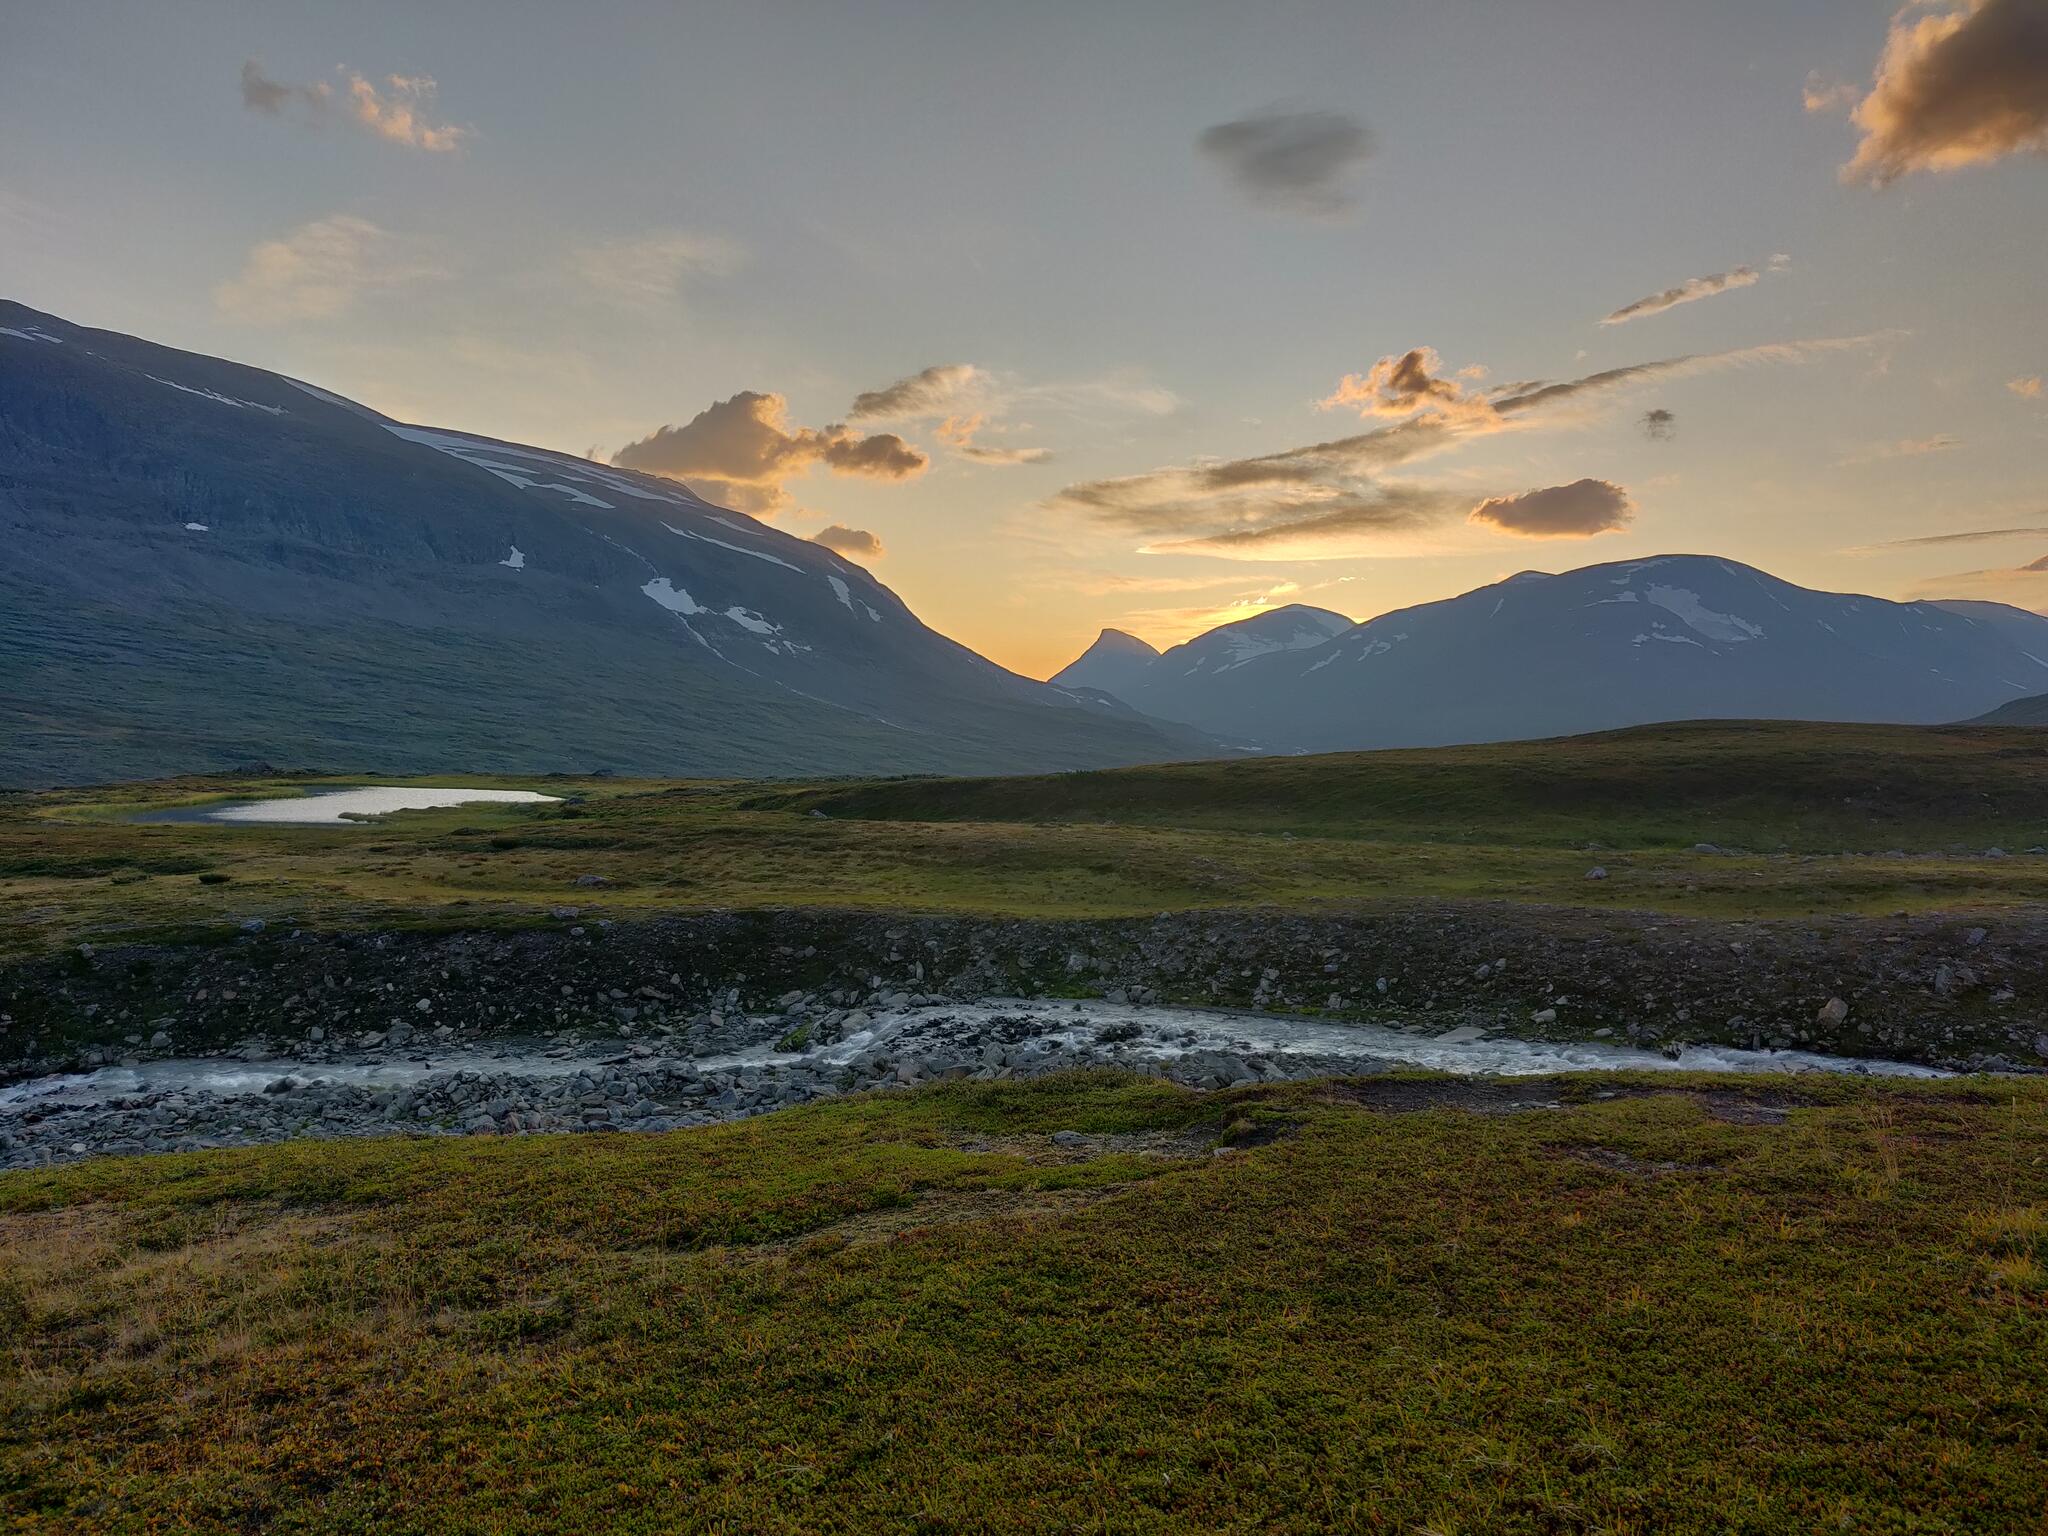 The sunset over Ruohtes from the shores of Tjaggnarisjahka.  The distinctive peak in the distance must be Guohper.